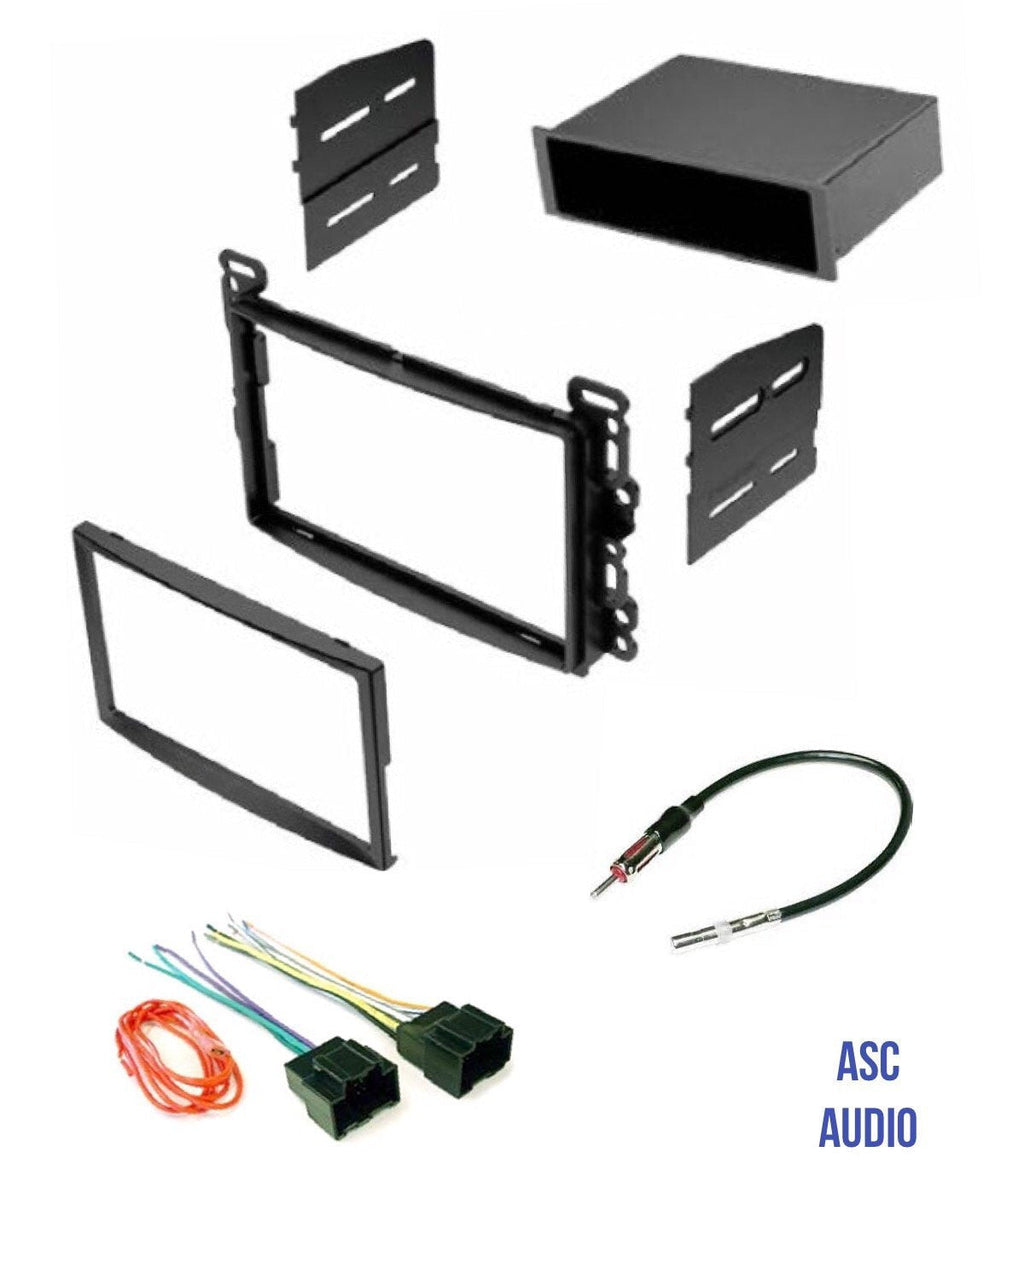 ASC Audio Car Stereo Dash Kit, Wire Harness, and Antenna Adapter for some Chevrolet Pontiac Saturn Vehicles - Compatible Vehicles Listed Below